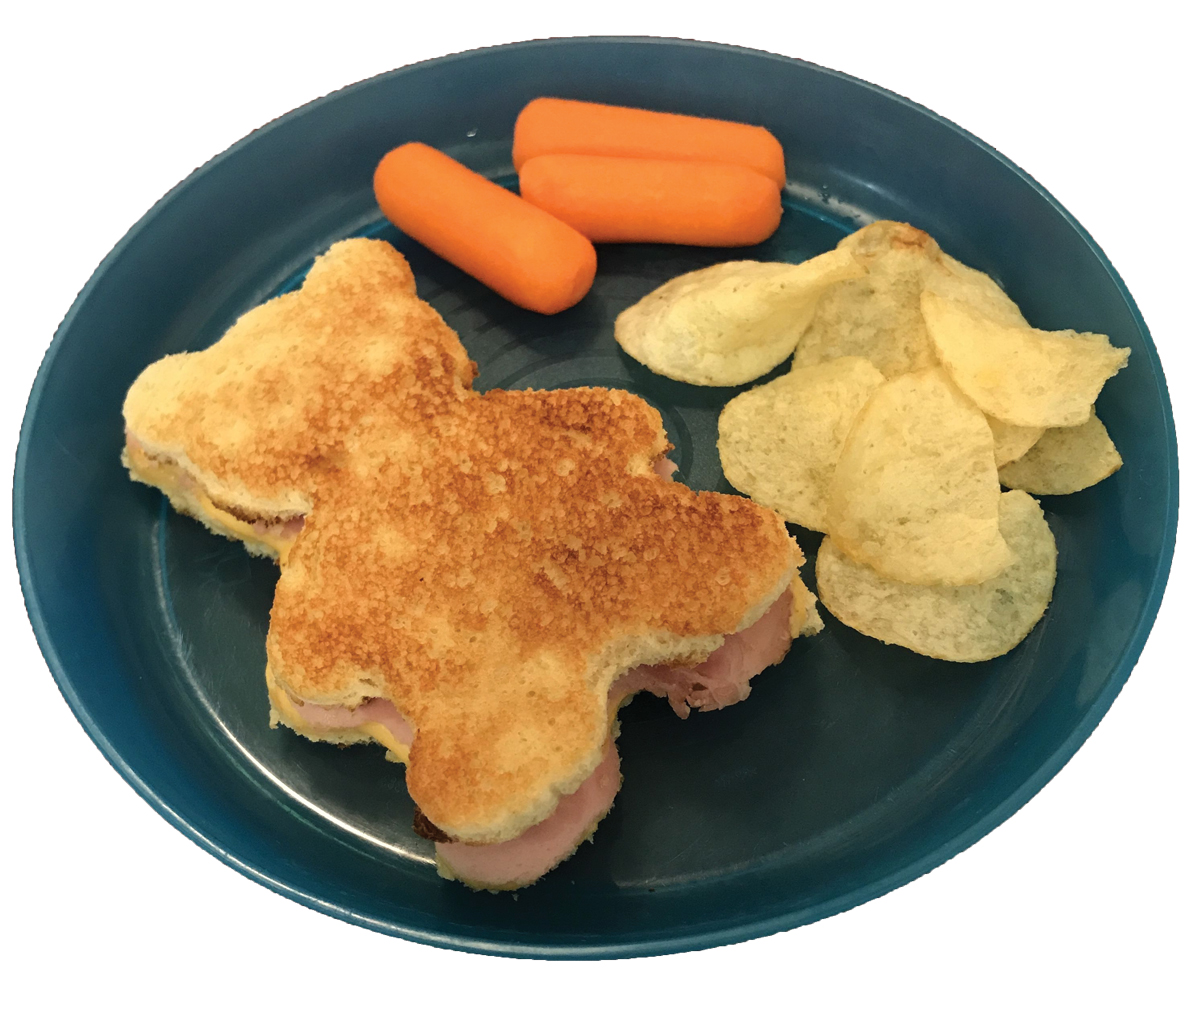 A picture of sandwich shaped like bear with carrots and potato chips. 